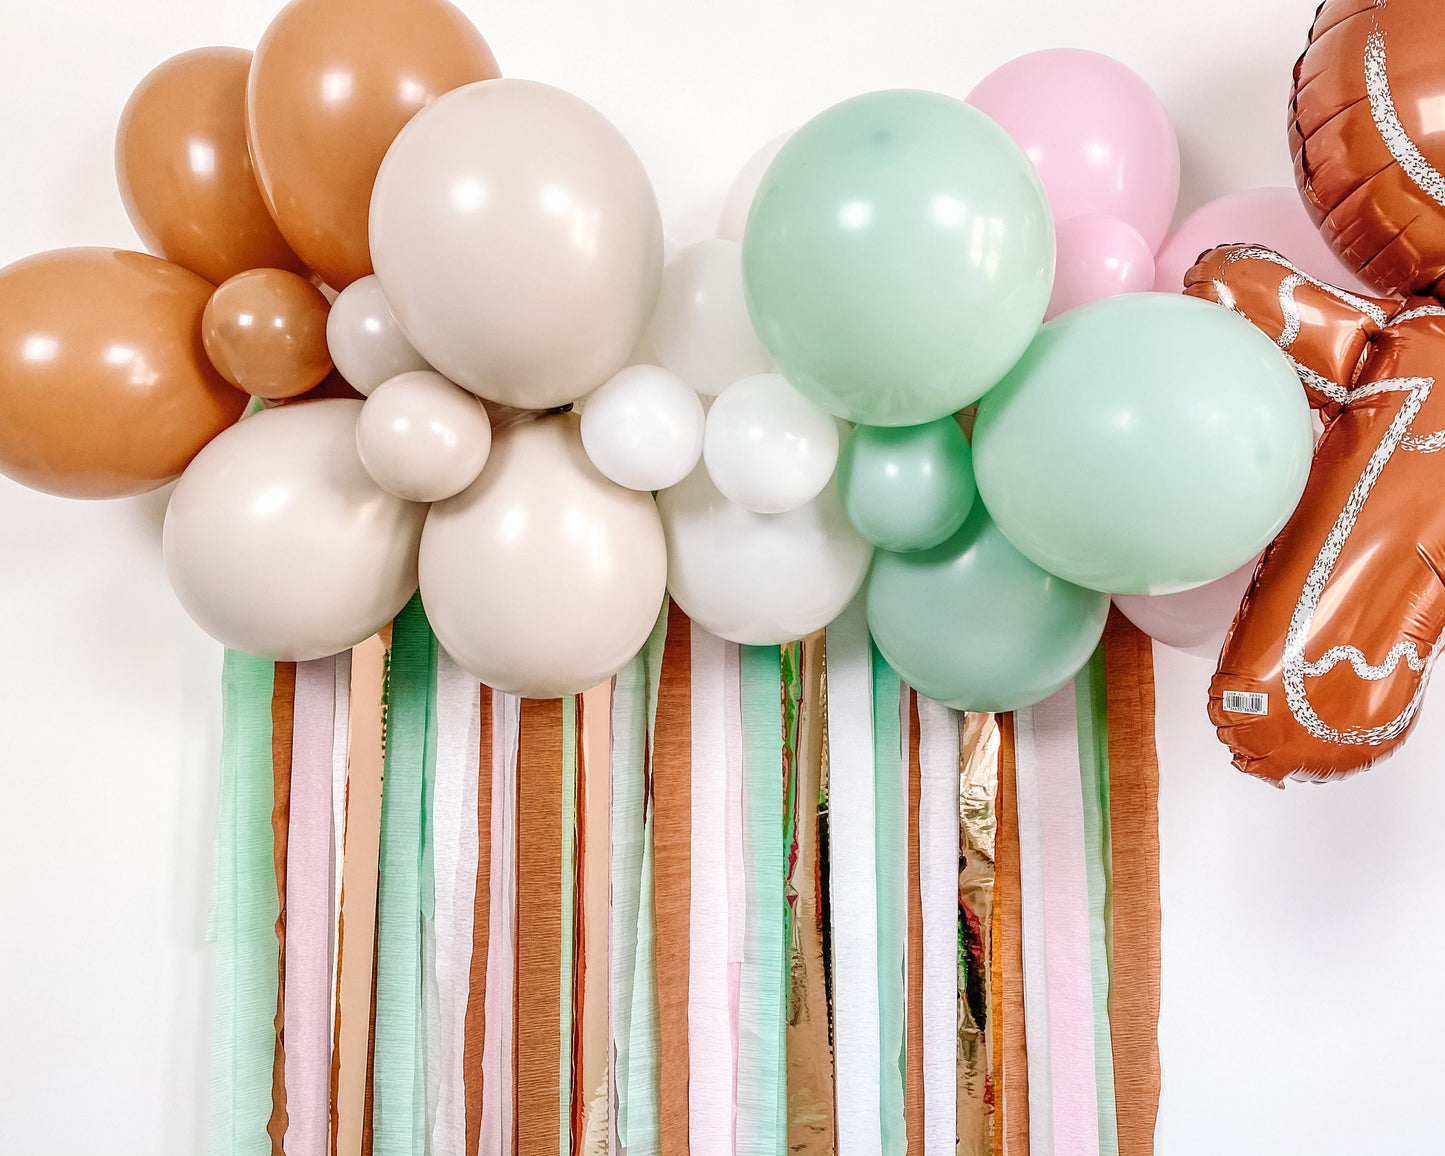 4' Gingerbread Balloon & Streamer Backdrop Kit || Pink Christmas Balloon Garland || Balloon Arch || Christmas Party Decor || Cookie Exchange